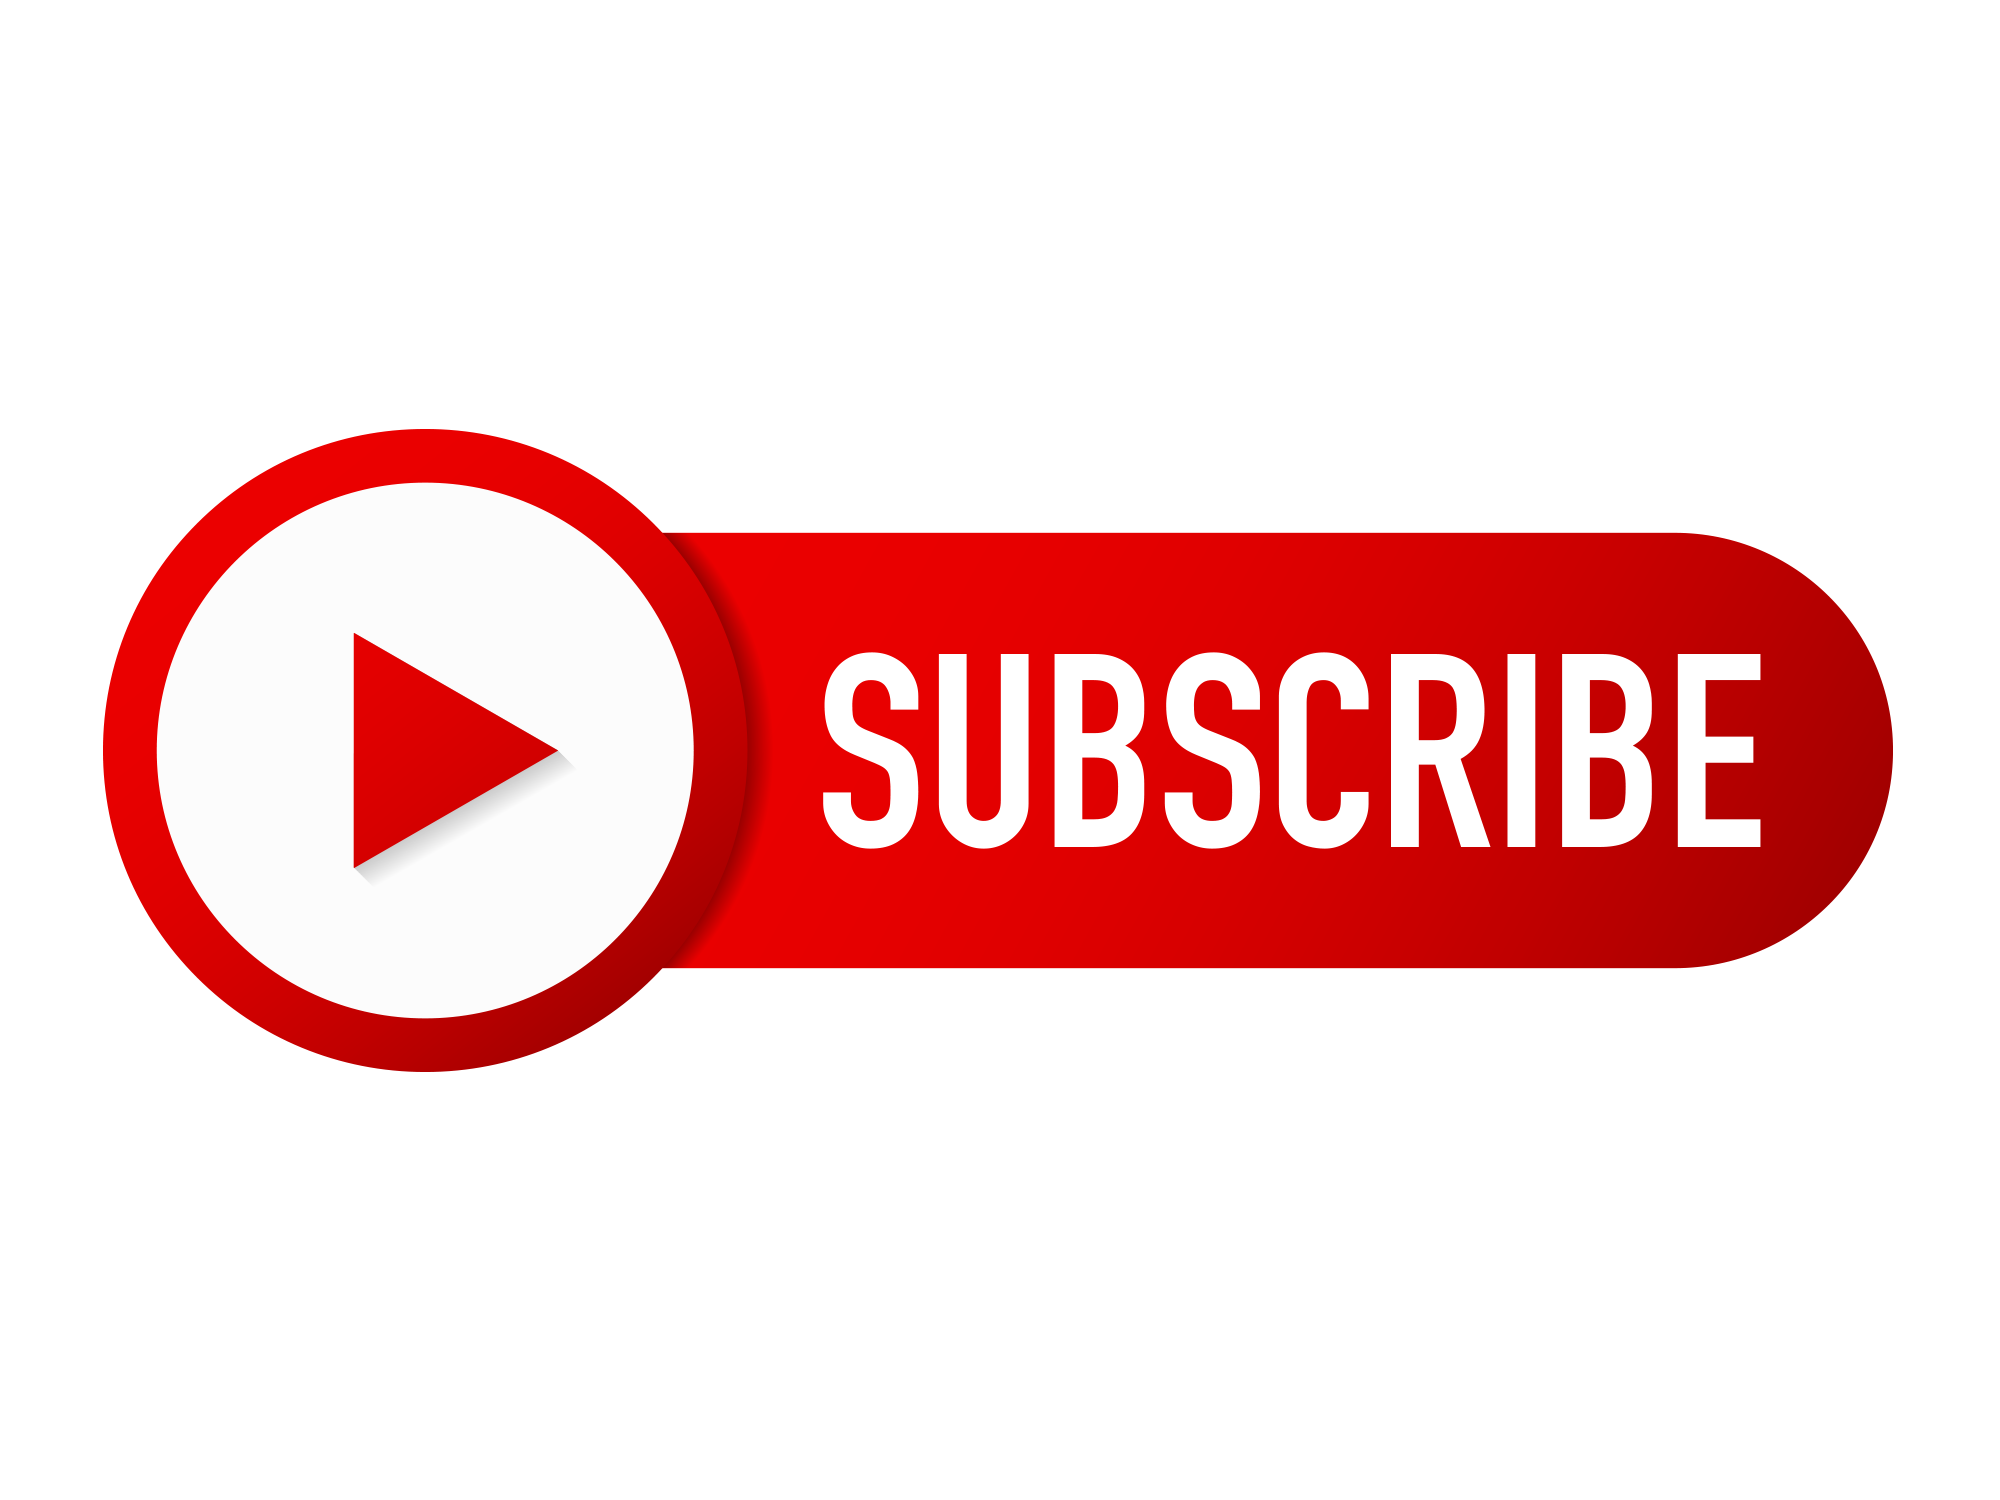 Youtube Banner Subscribe Button